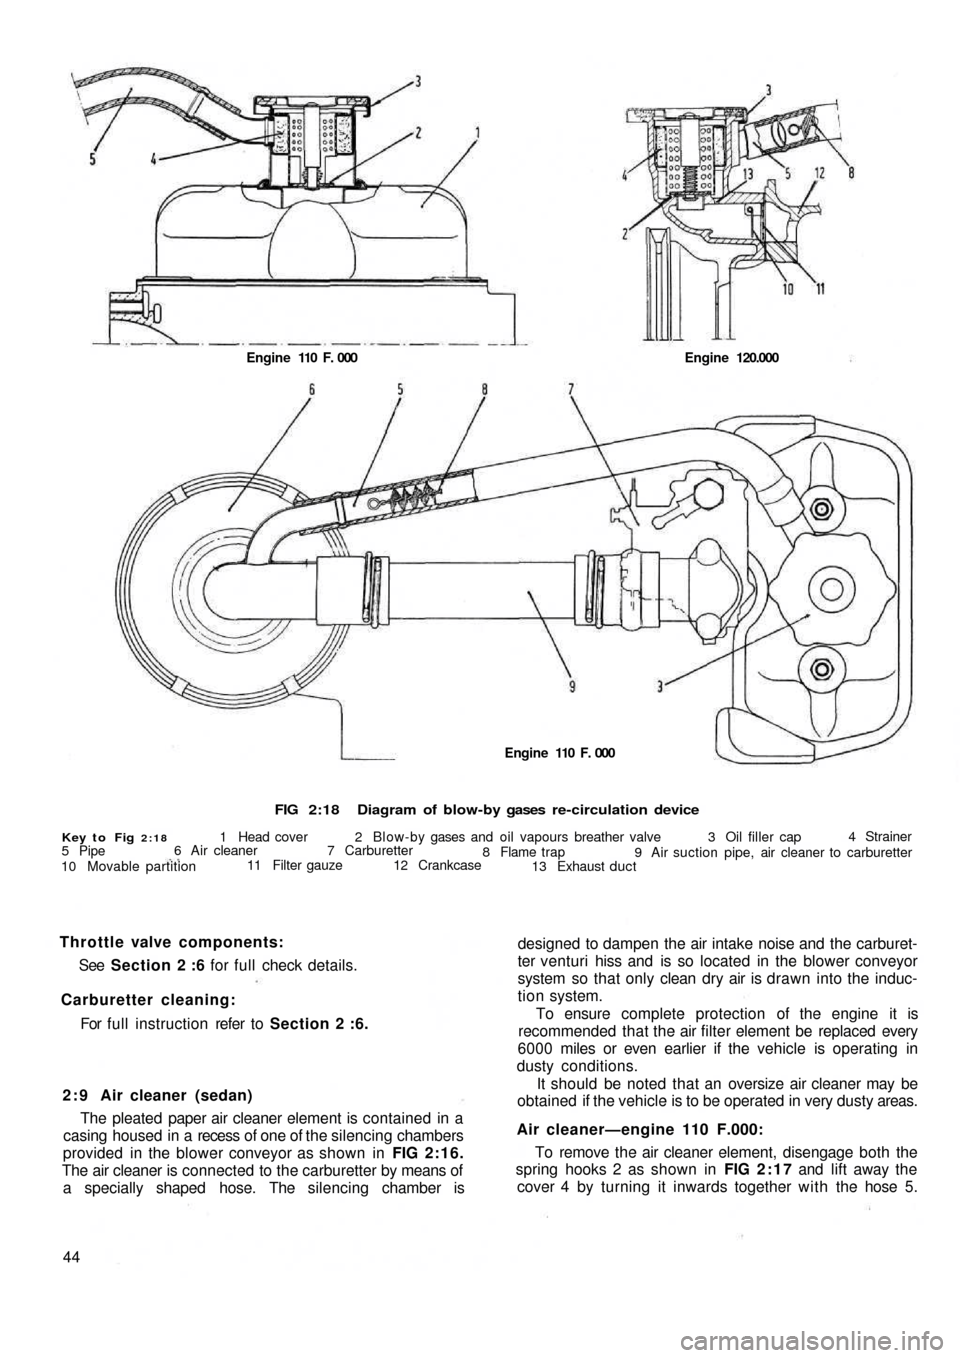 FIAT 500 1971 1.G Owners Manual FIG 2:18Diagram of blow-by gases  re-circulation device
Key to Fig 2:181 Head cover 2 Blow-by gases and  oil vapours breather valve 3 Oil filler cap4 Strainer
9 Air suction pipe, air cleaner to carbur